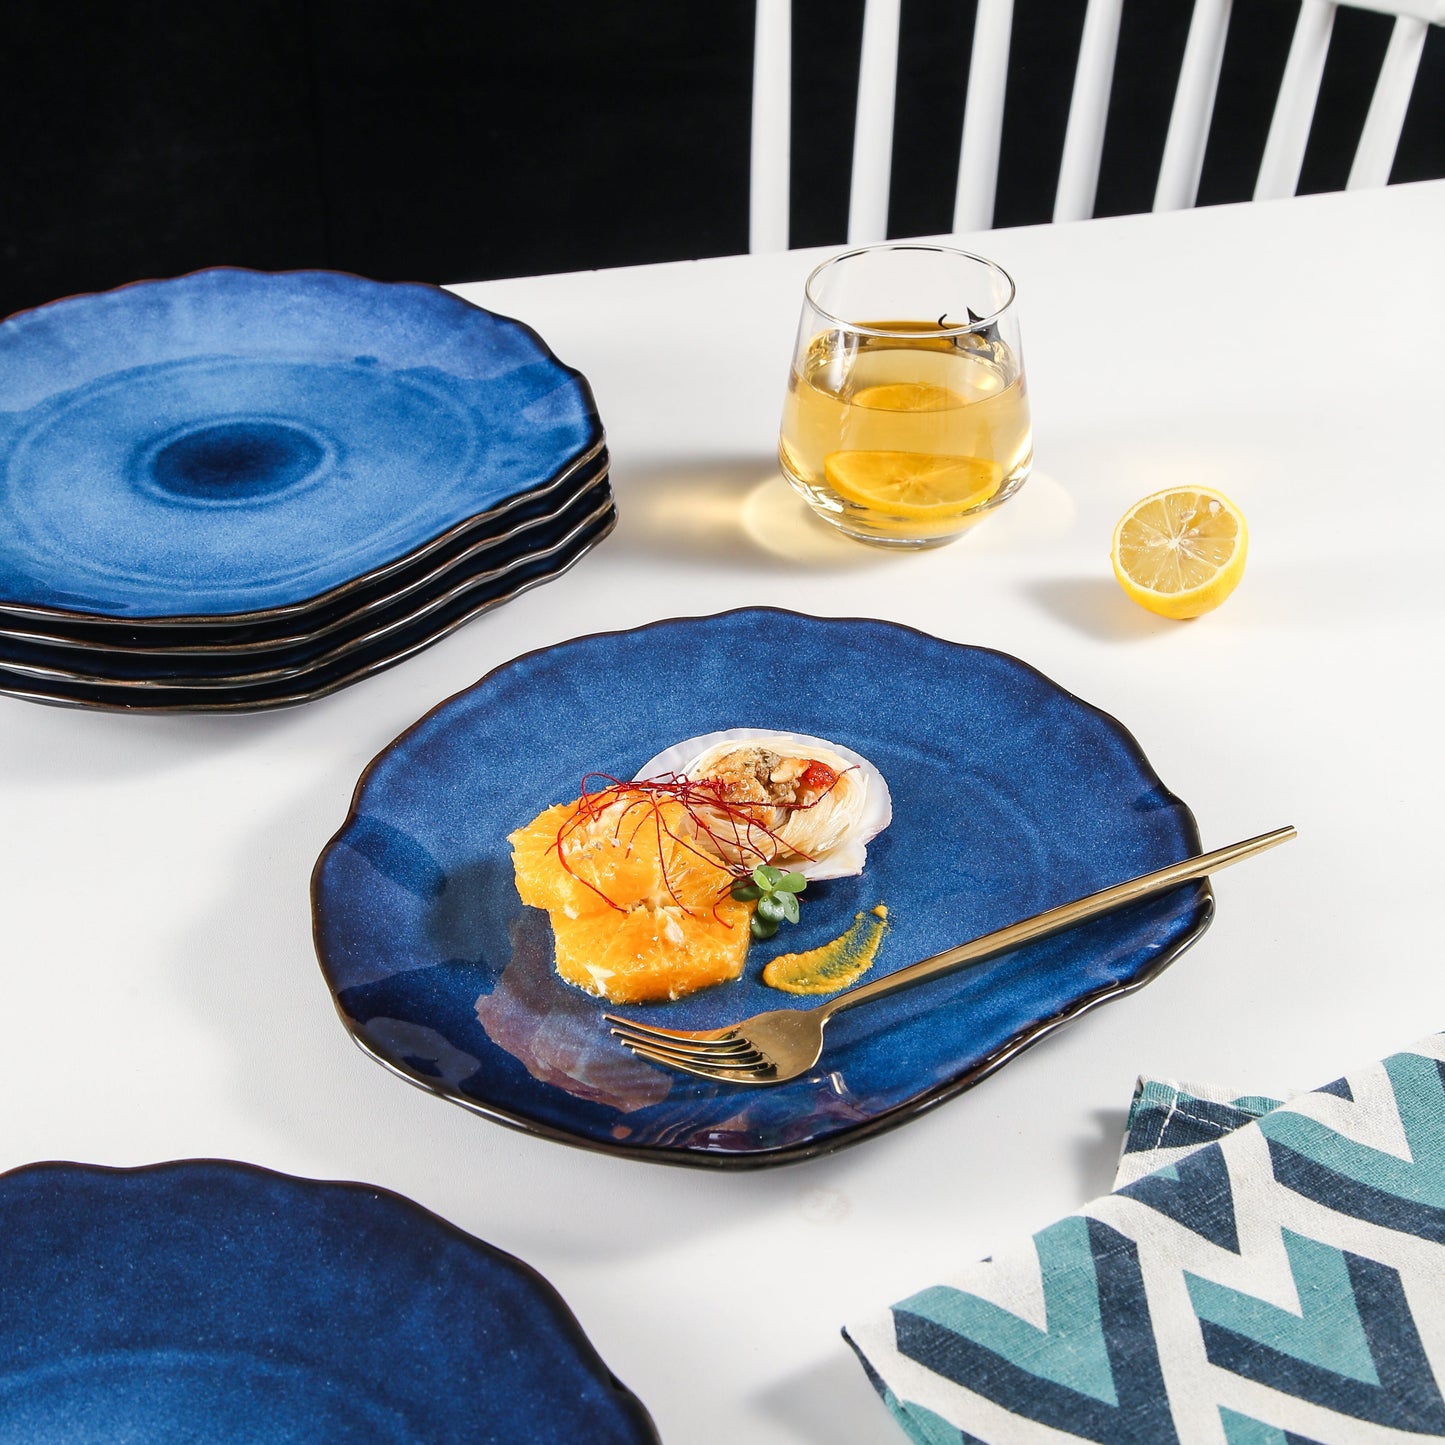 Decosignature Blue Elegance: 6-Piece 10.25 Inch Dinner Plate Set for Sophisticated Dining